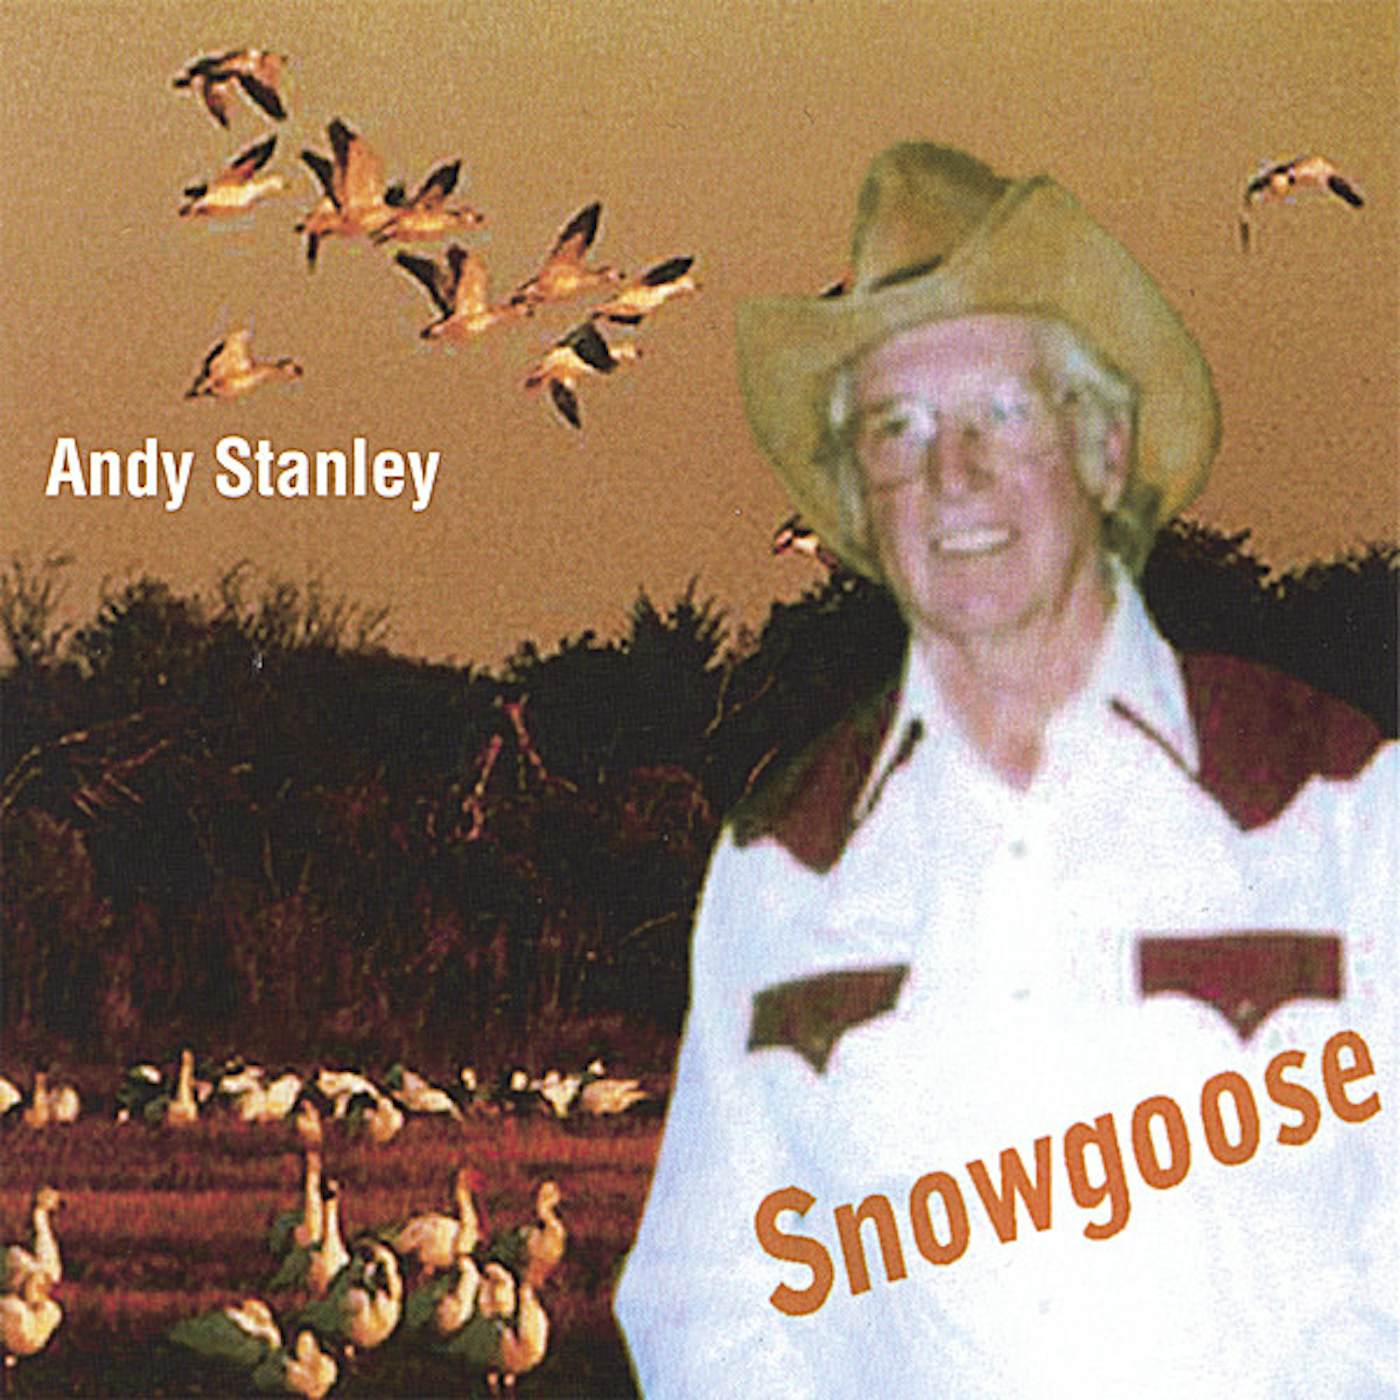 Andy Stanley SNOWGOOSE CD